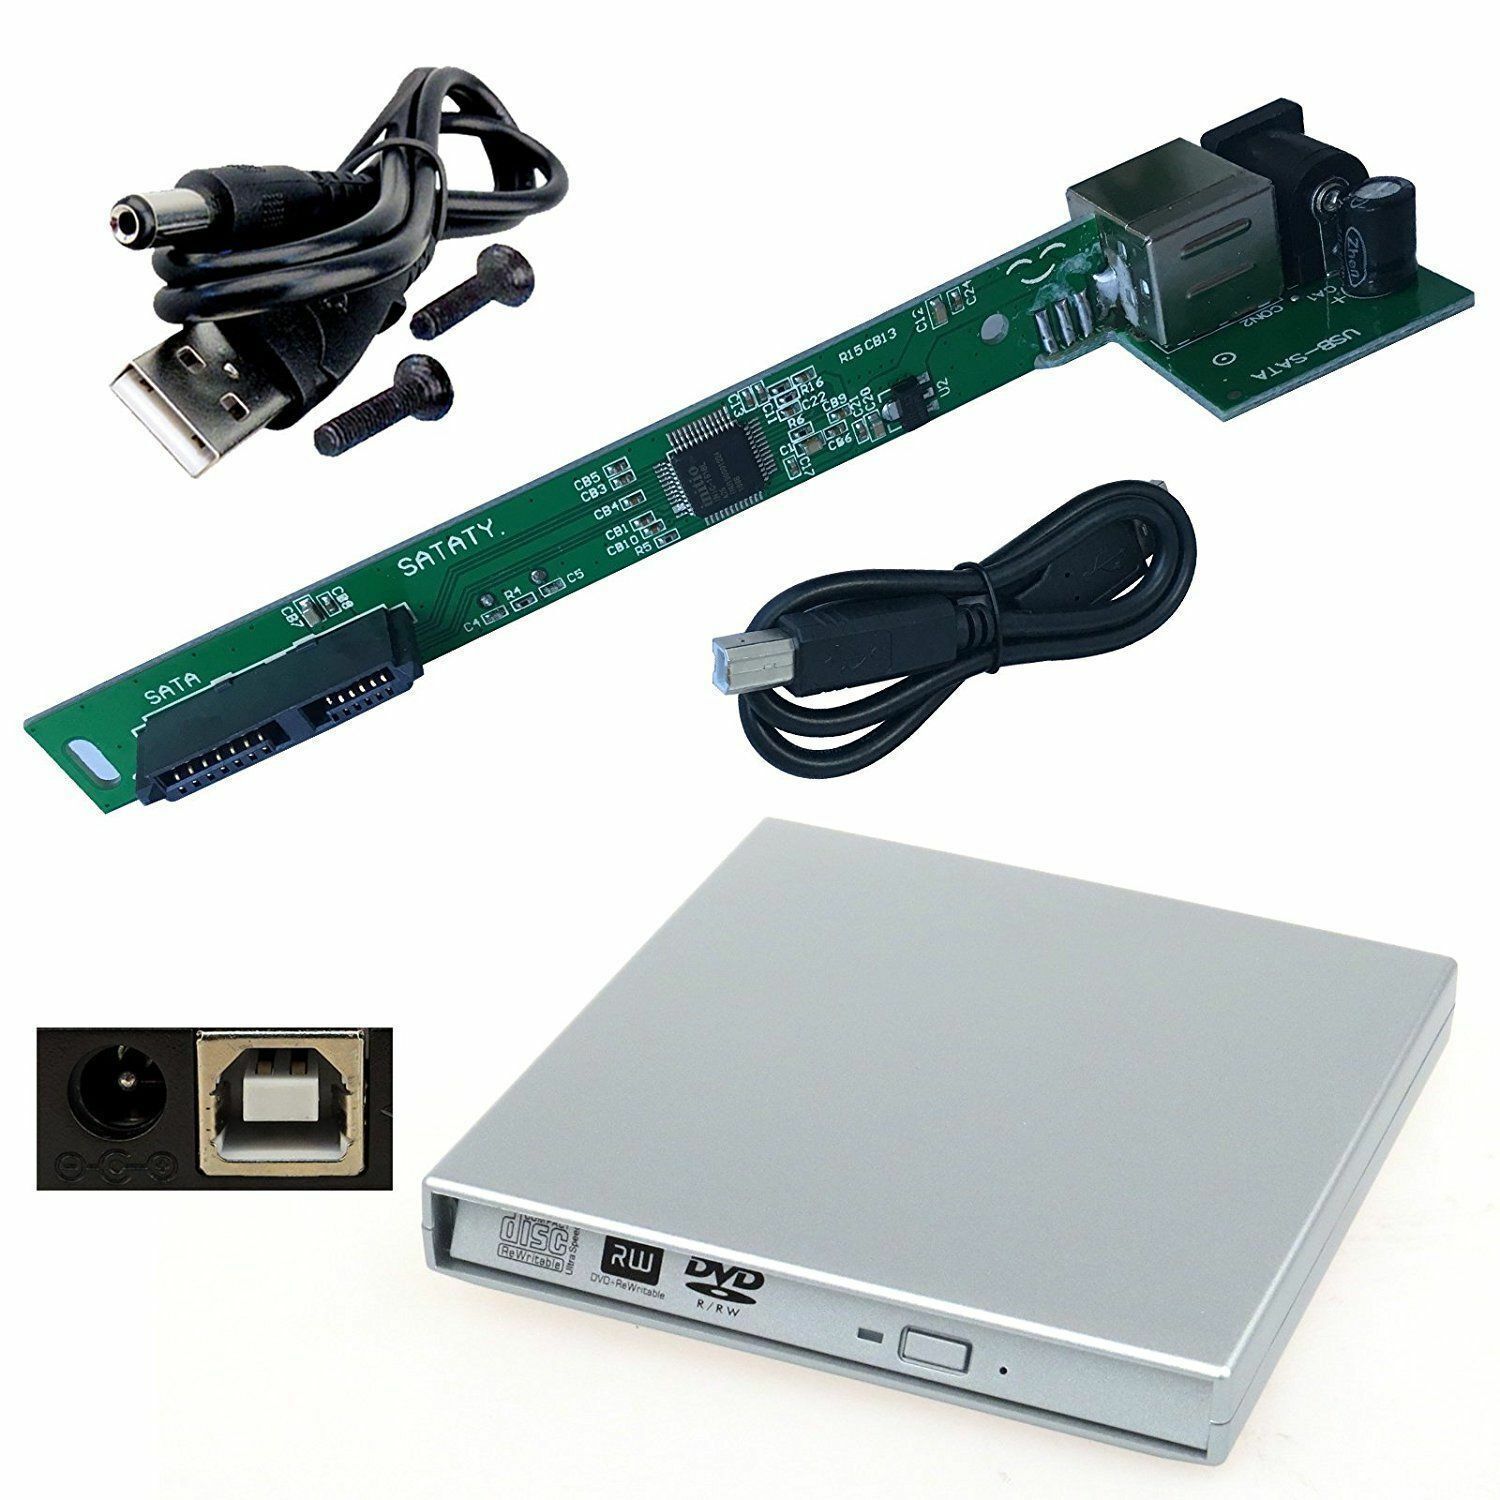 Laptop Usb To Sata Cd Dvd Combo Rw Rom External Drive Case Cover Caddy Enclosure